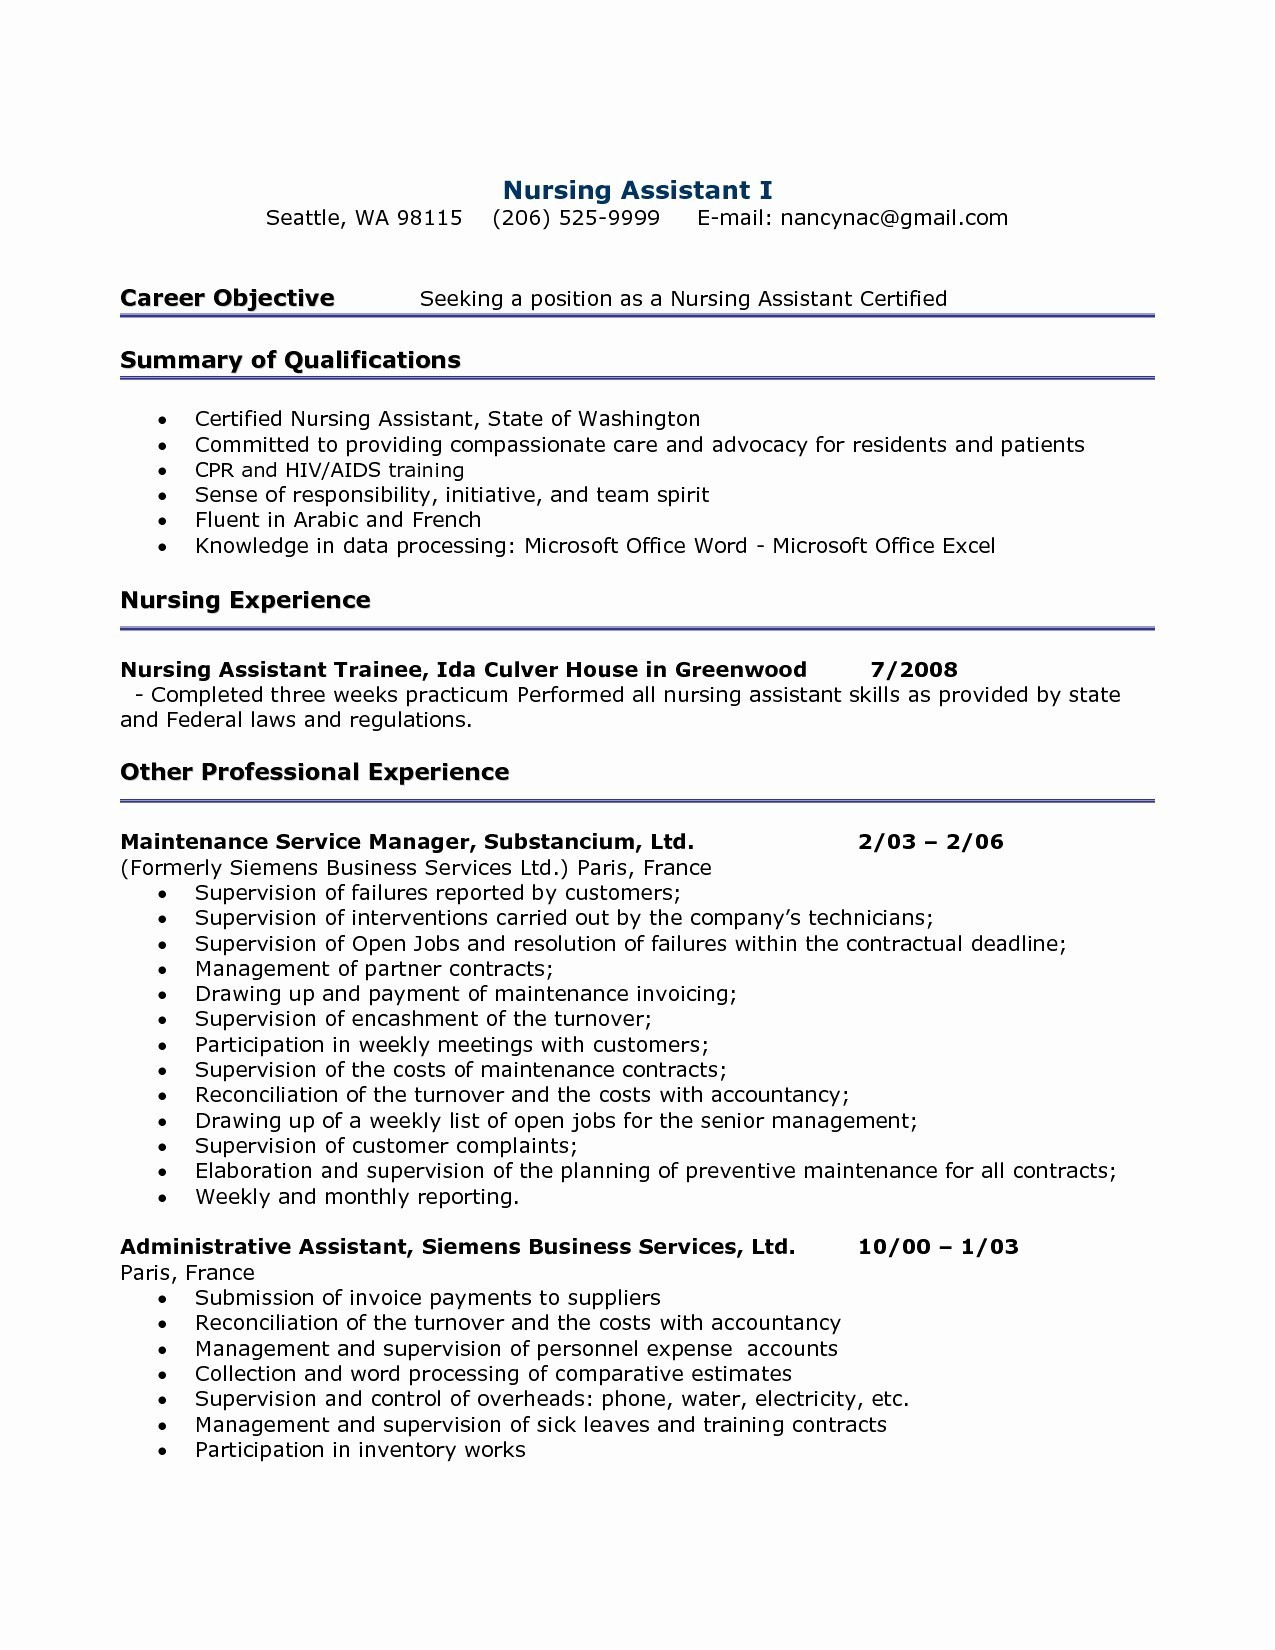 Hr Letter Template - Preparing A Resume Awesome Beautiful Resume Cover Letter It Sample